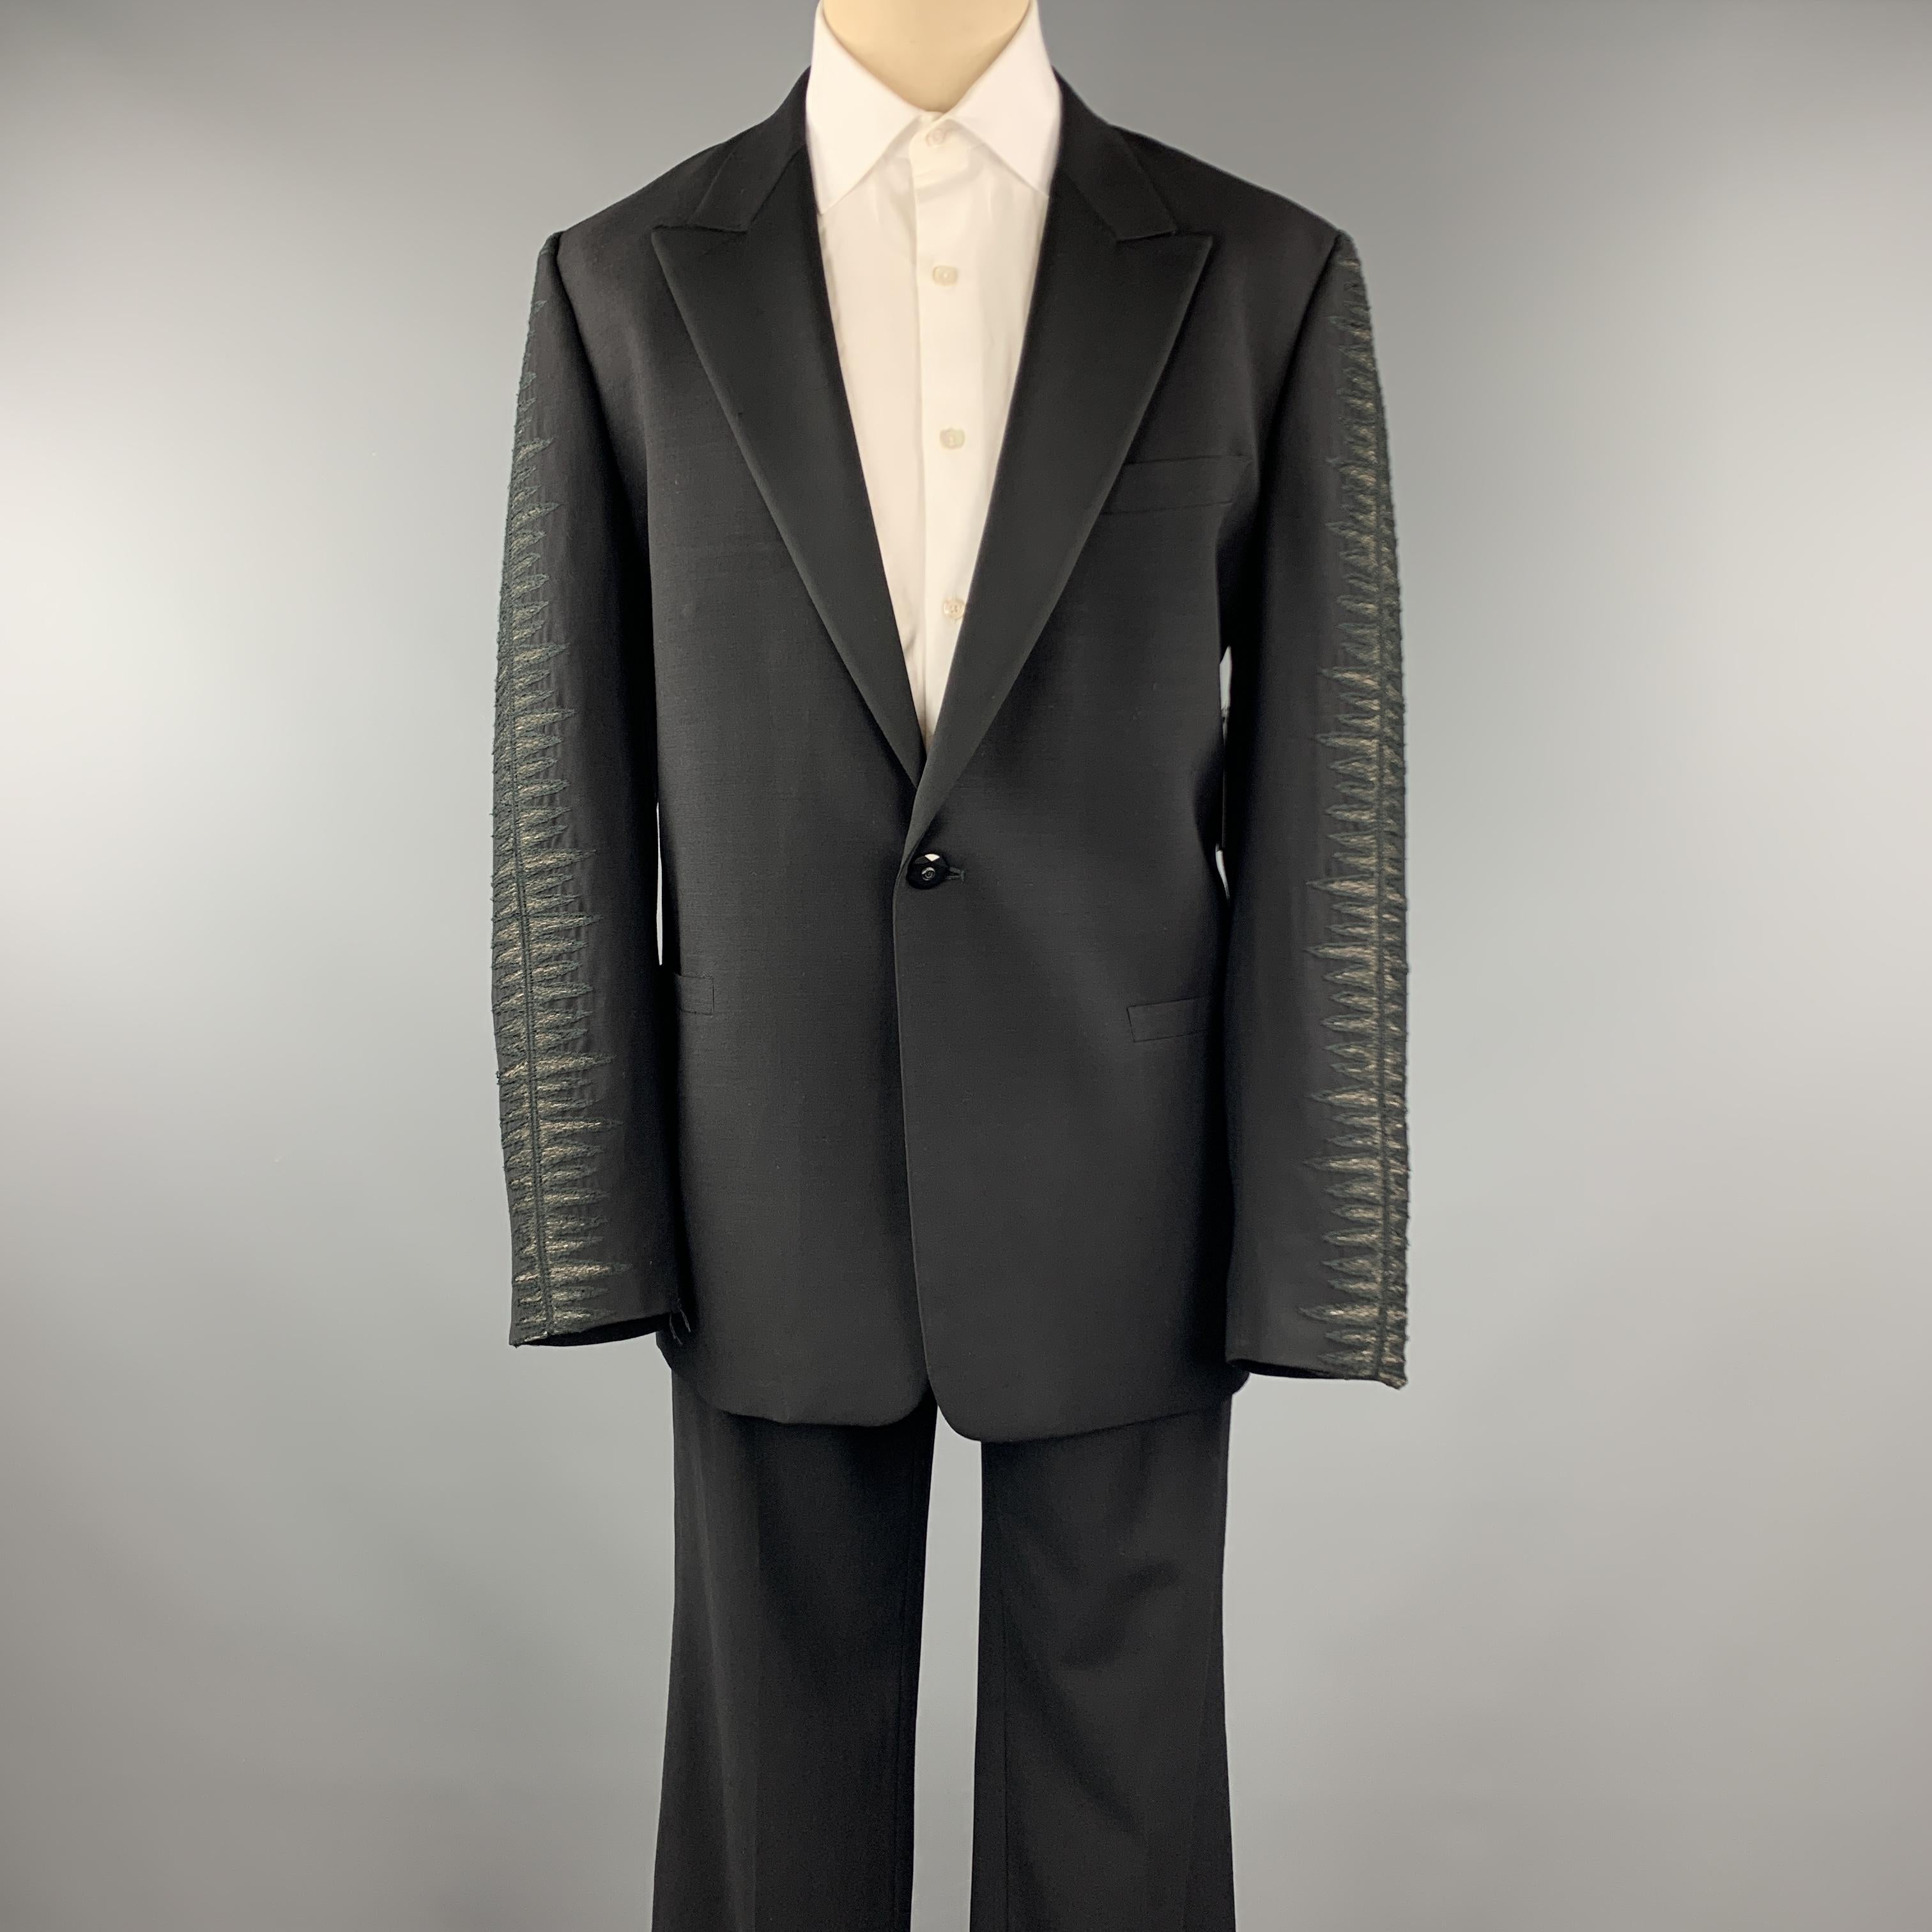 VINTAGE GIANNI VERSACE suit comes in a black wool featuring a tuxedo style, sleeve embroidered details, peak lapel, single button closure, and matching flat front trousers. Made in Italy. 
 

Excellent Pre-Owned Condition.
Marked: IT